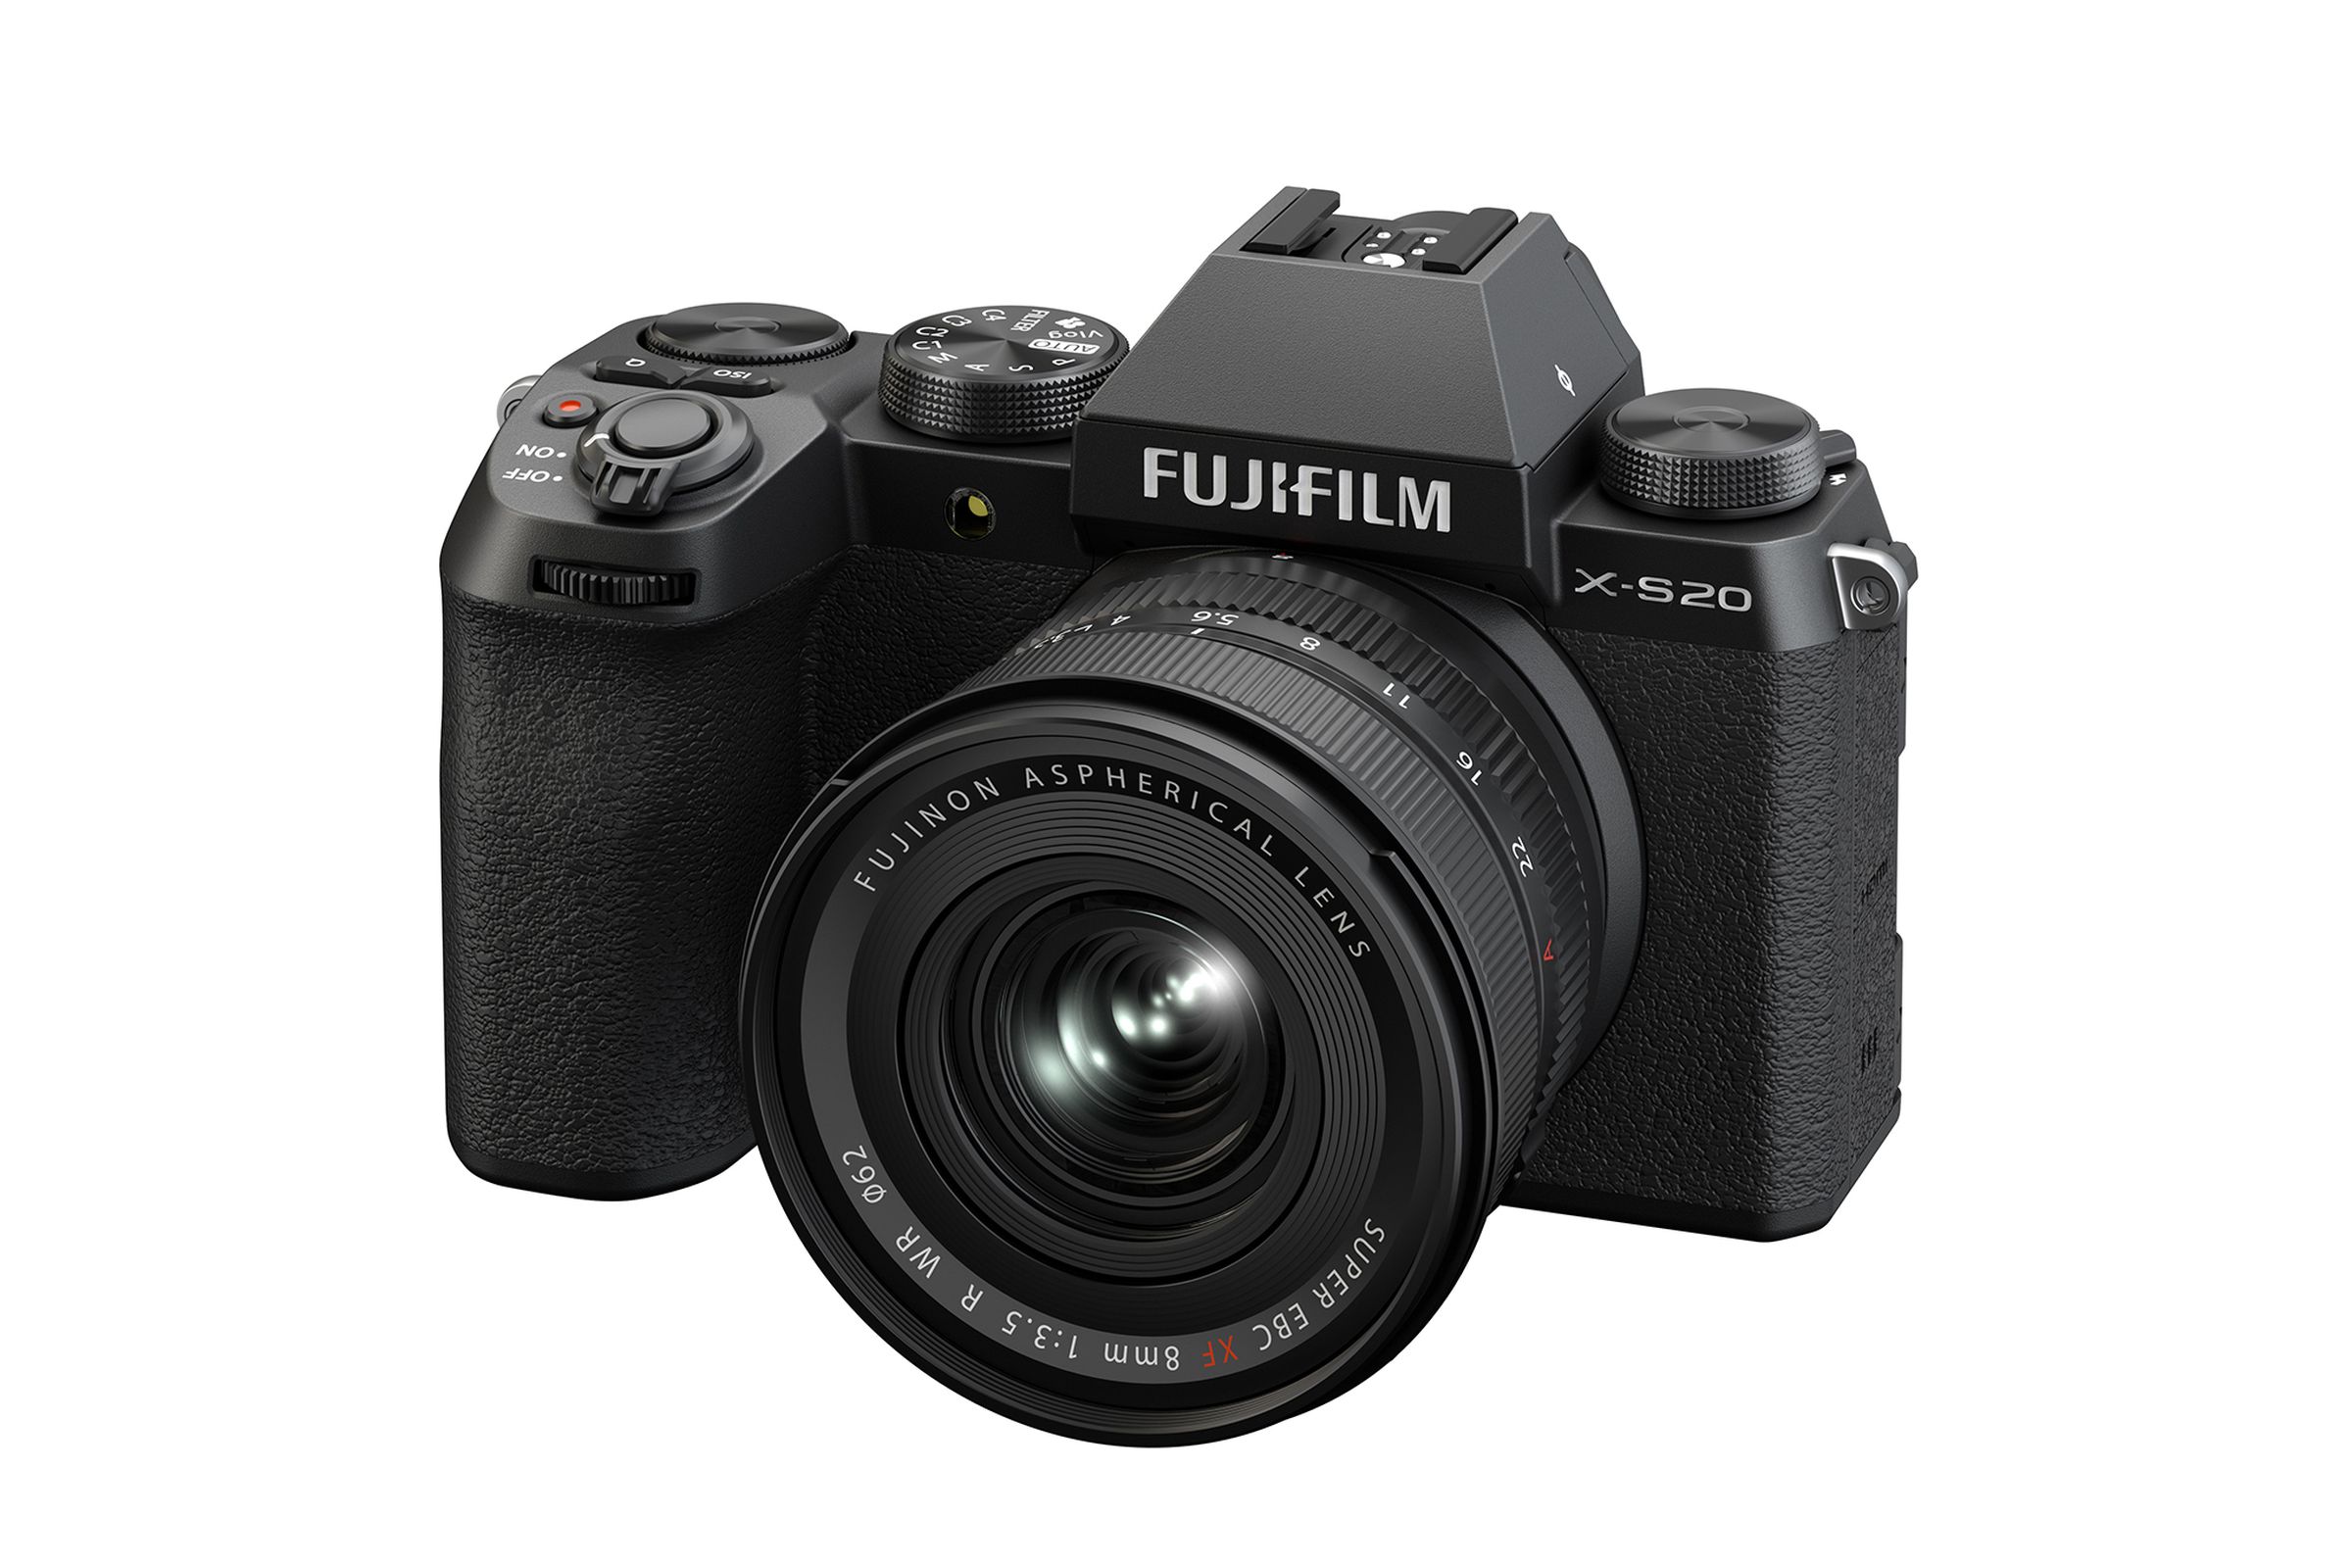 The Fujifilm X-S20 camera with an 8mm lens mounted on it, in front of a white background.